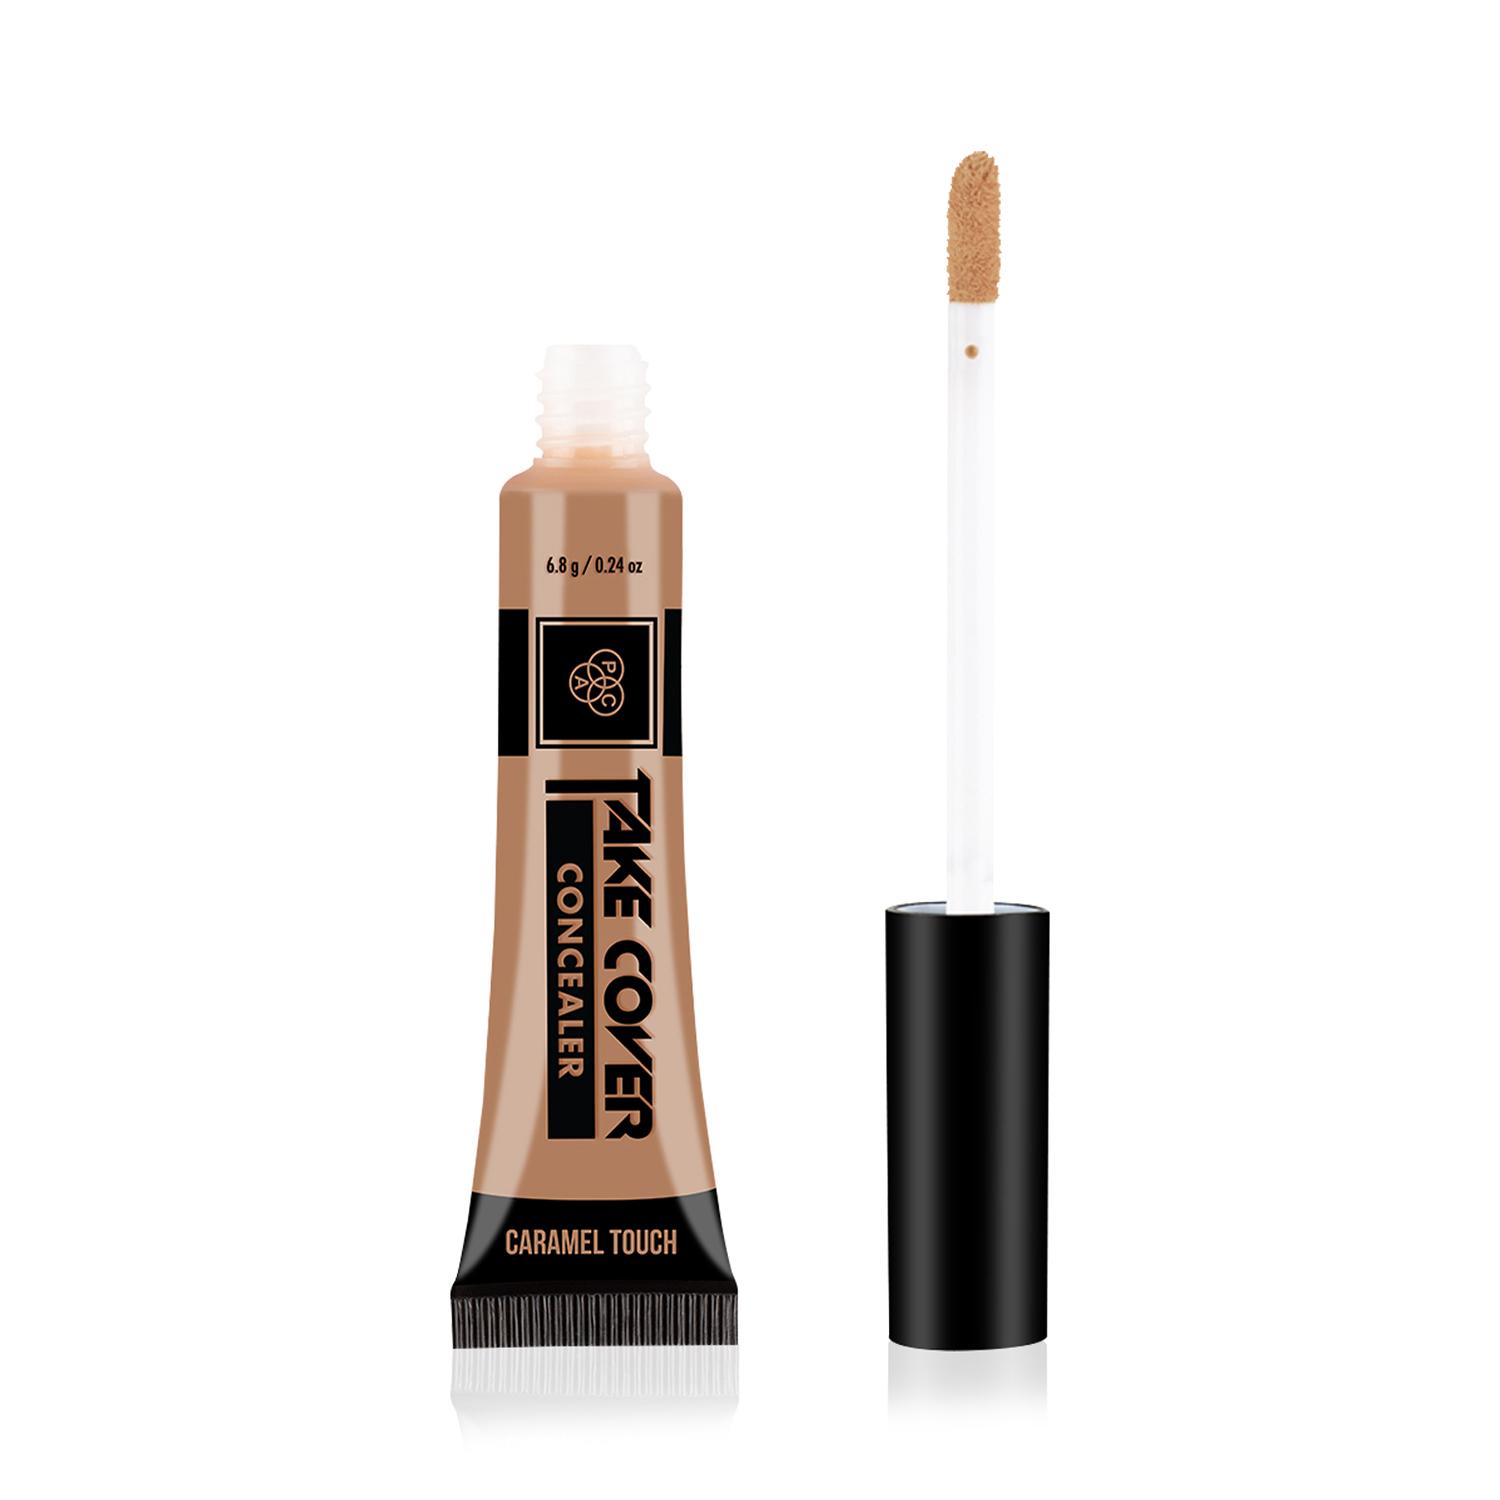 PAC | PAC Take Cover Concealer - 05 Caramel Touch (6.8g)